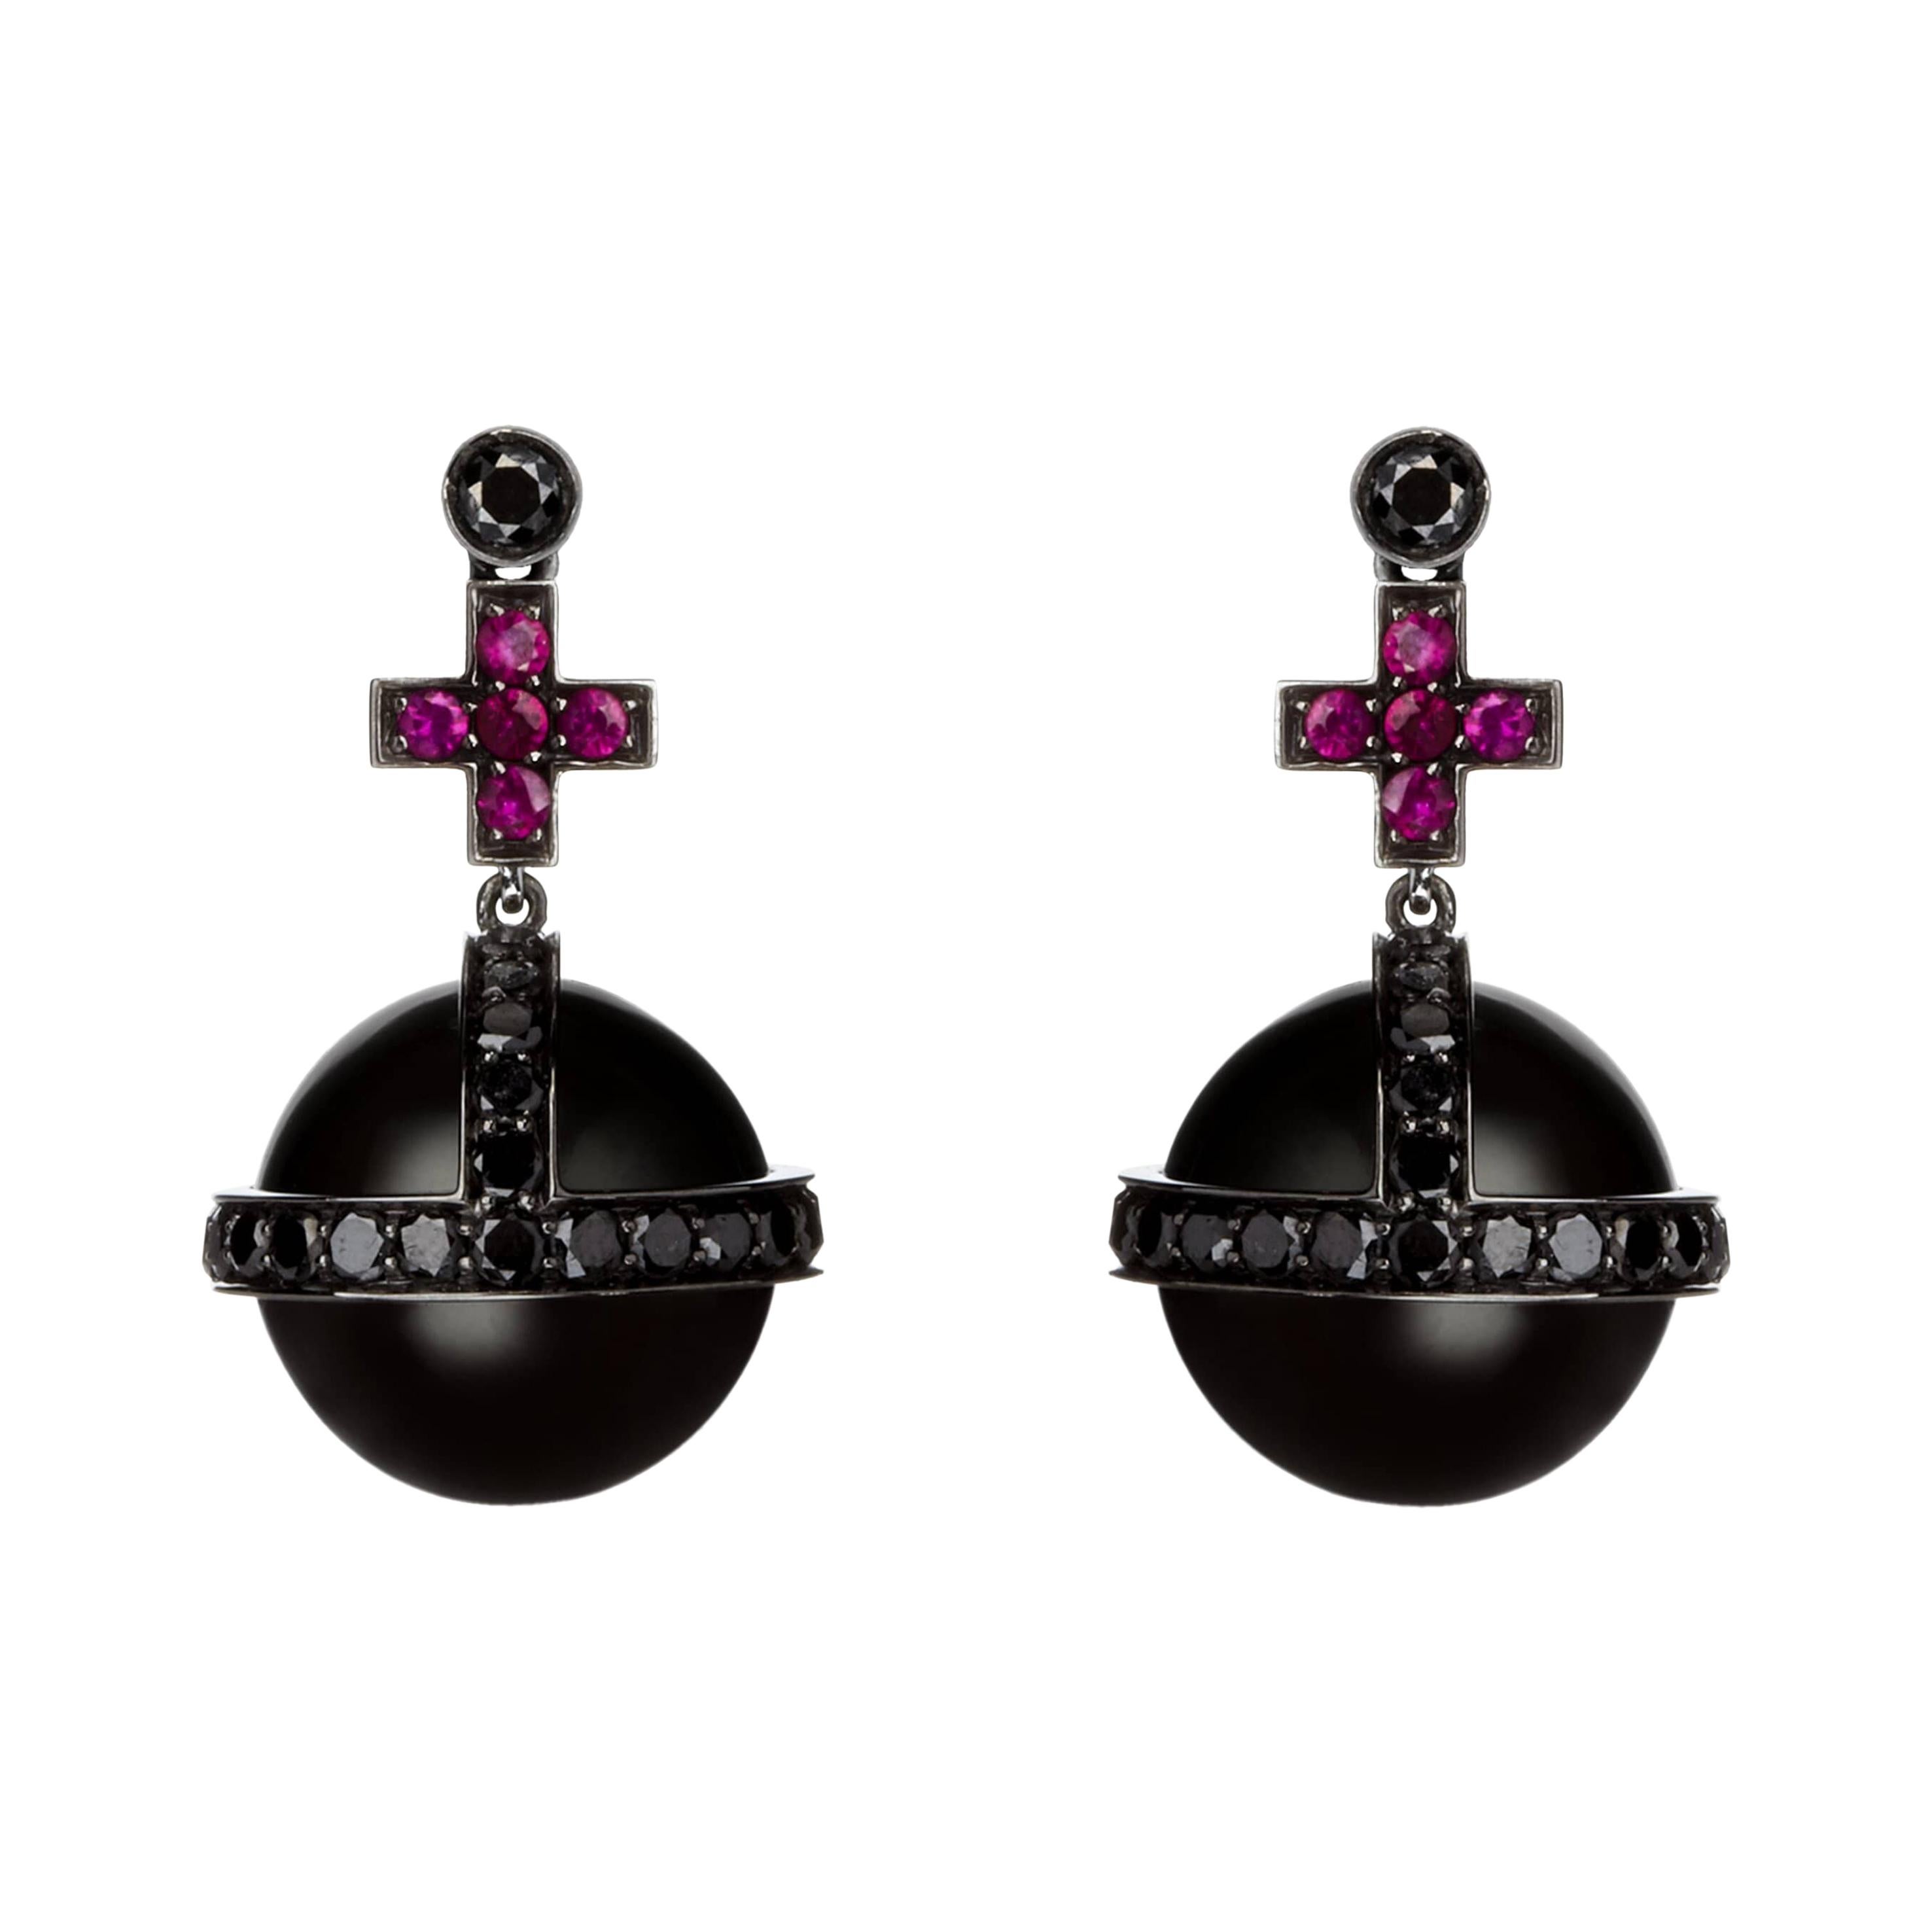 Sybarite Sceptre Earrings in Blackened Gold with Black Diamonds, Rubies & Pearl For Sale